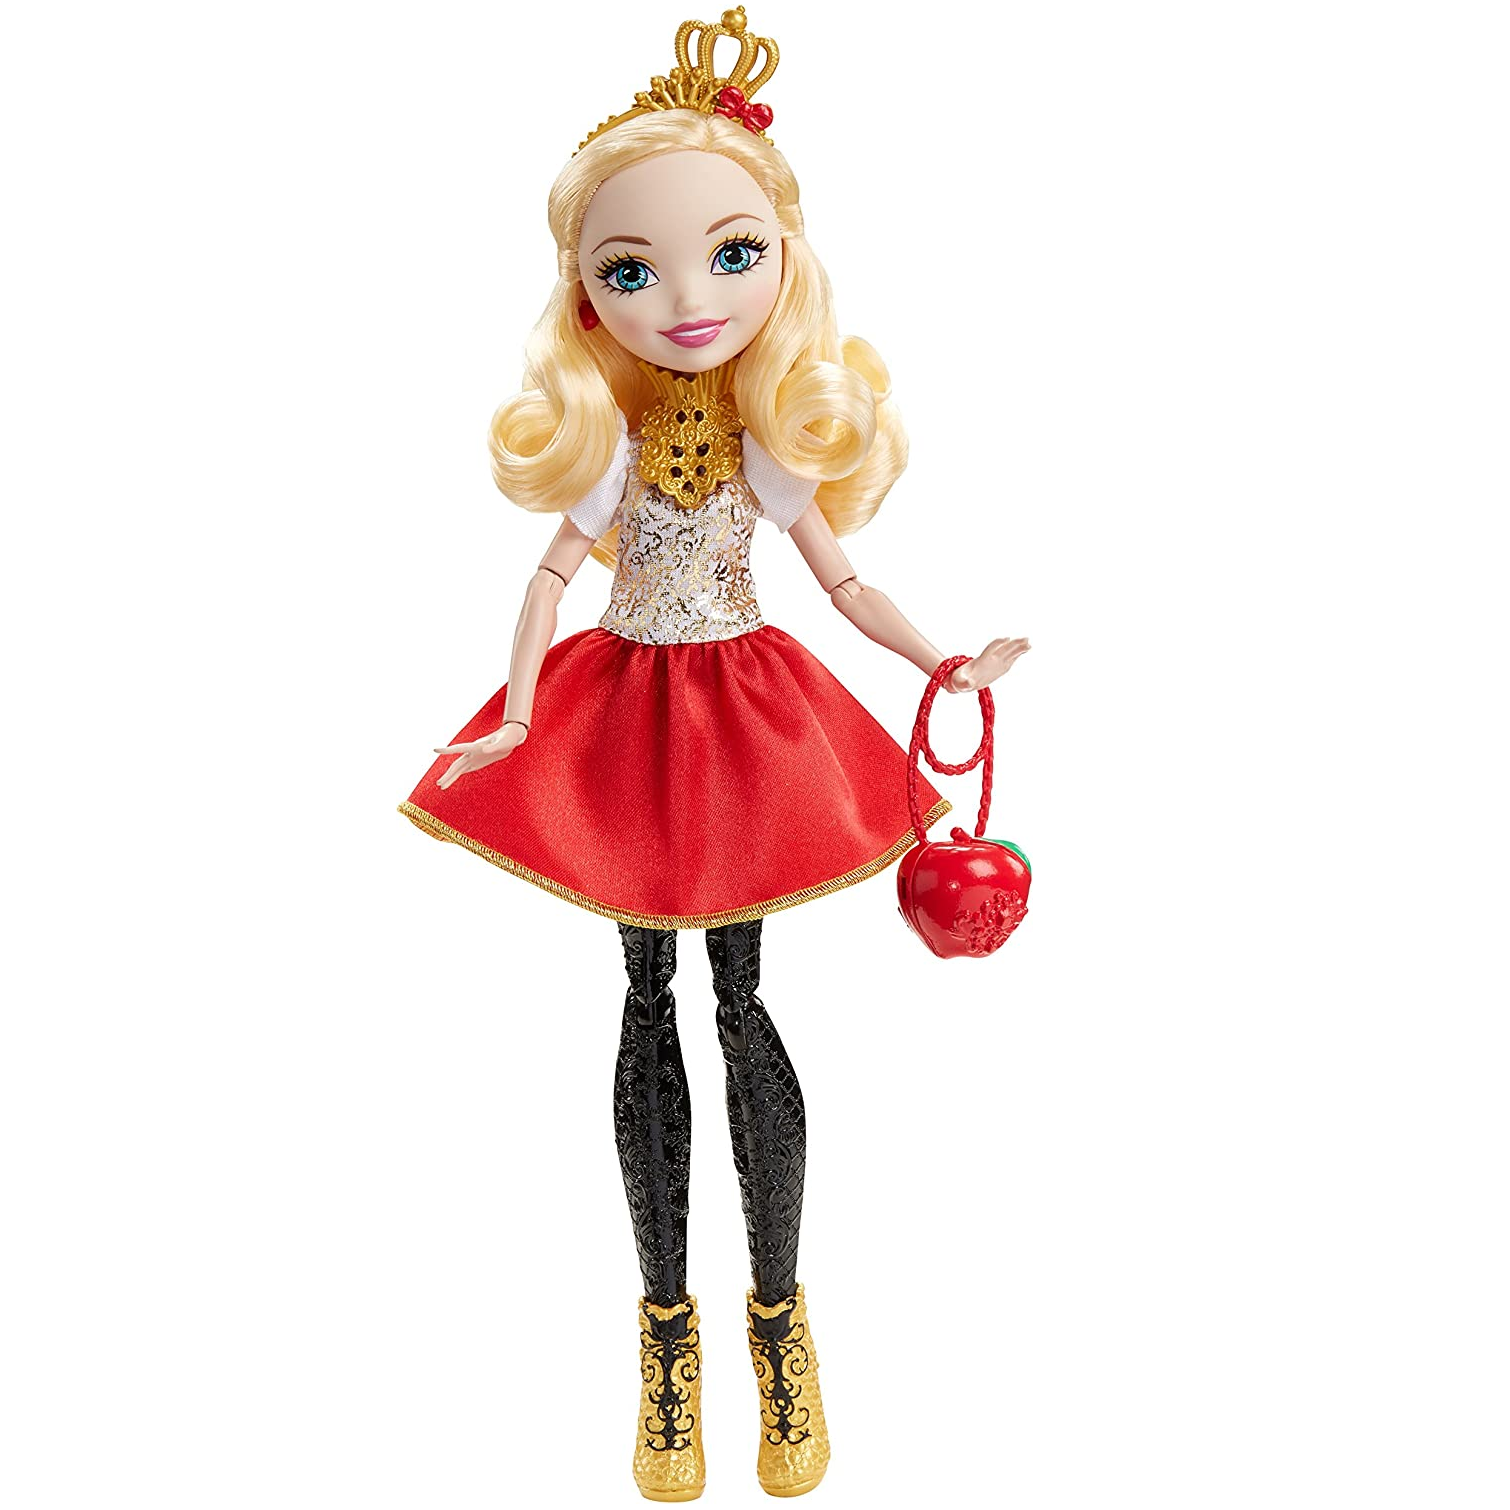  Mattel Ever After High Powerful Princess Tribe Apple Doll :  Toys & Games